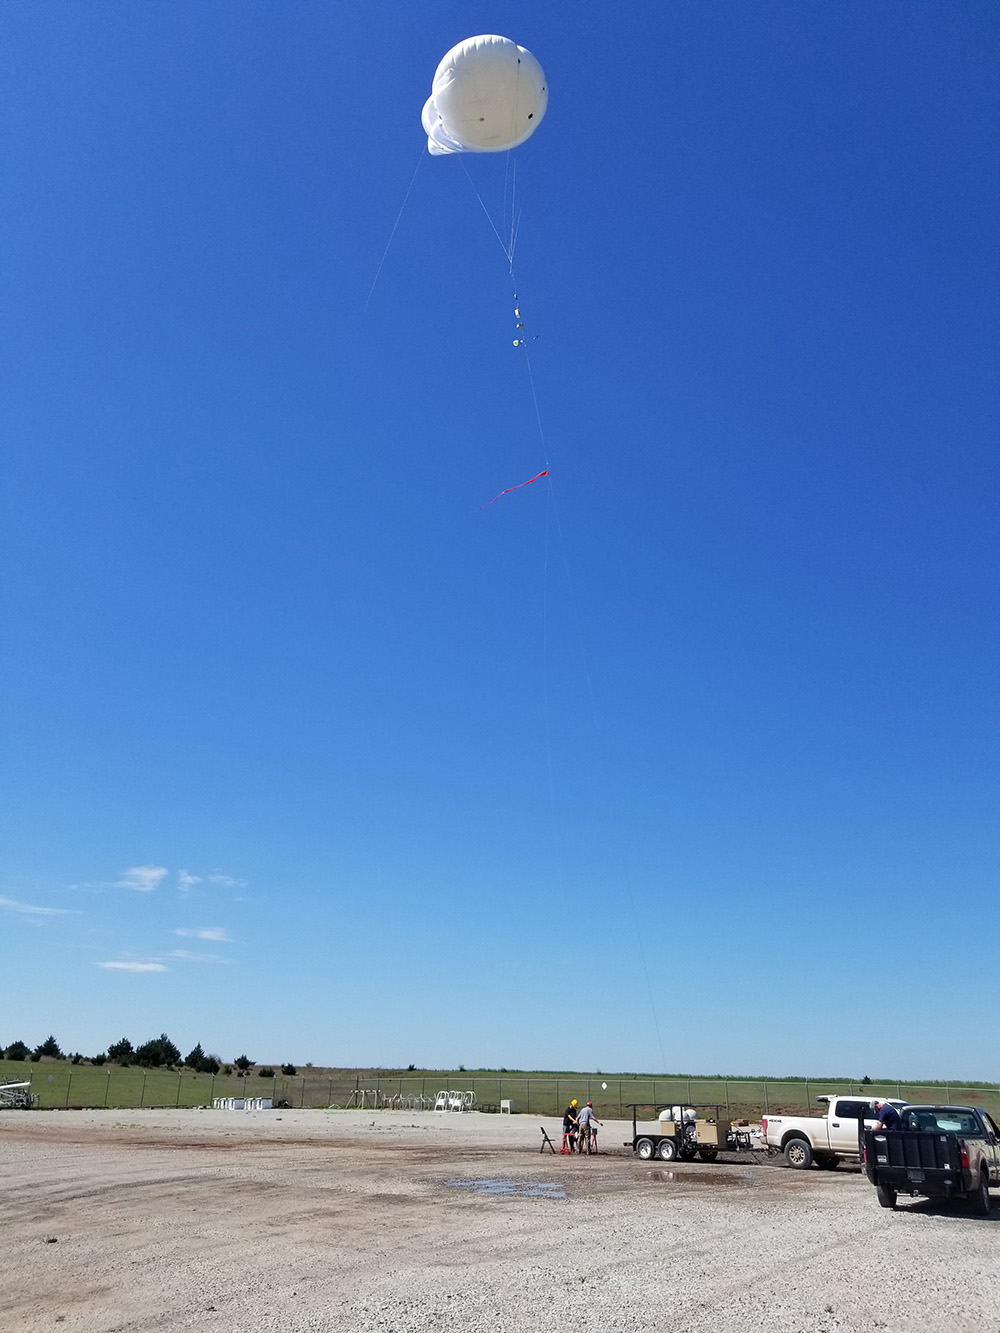 Tethered balloon at the Southern Great Plains atmospheric observatory